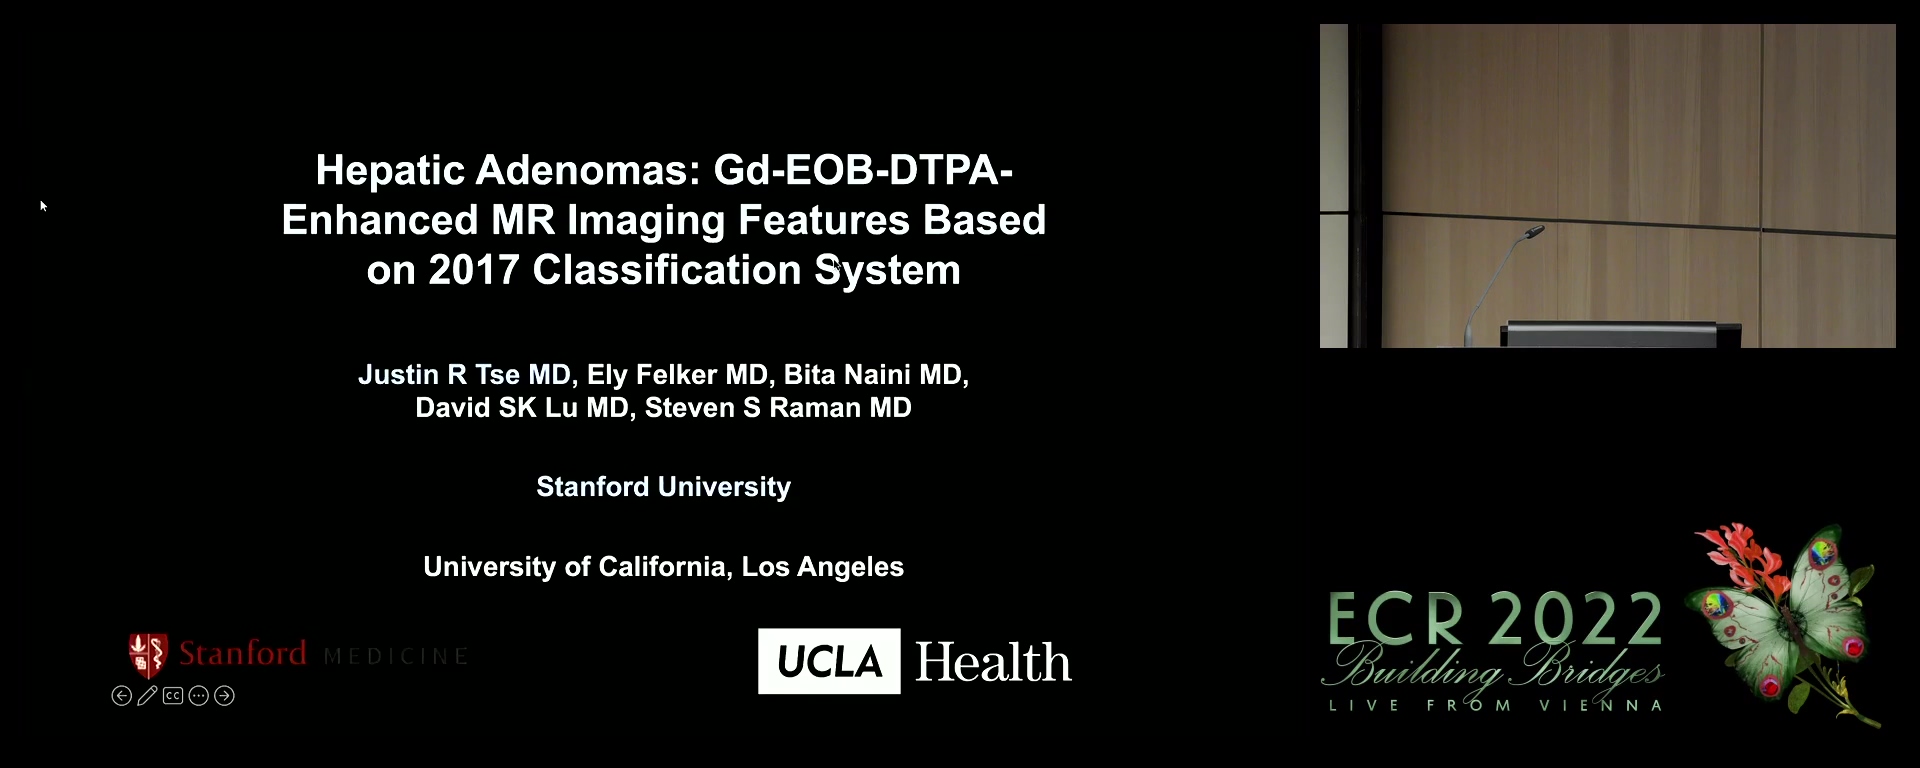 Hepatocellular Adenomas: Gd-EOB-DTPA-enhanced MR imaging features based on 2017 classification system